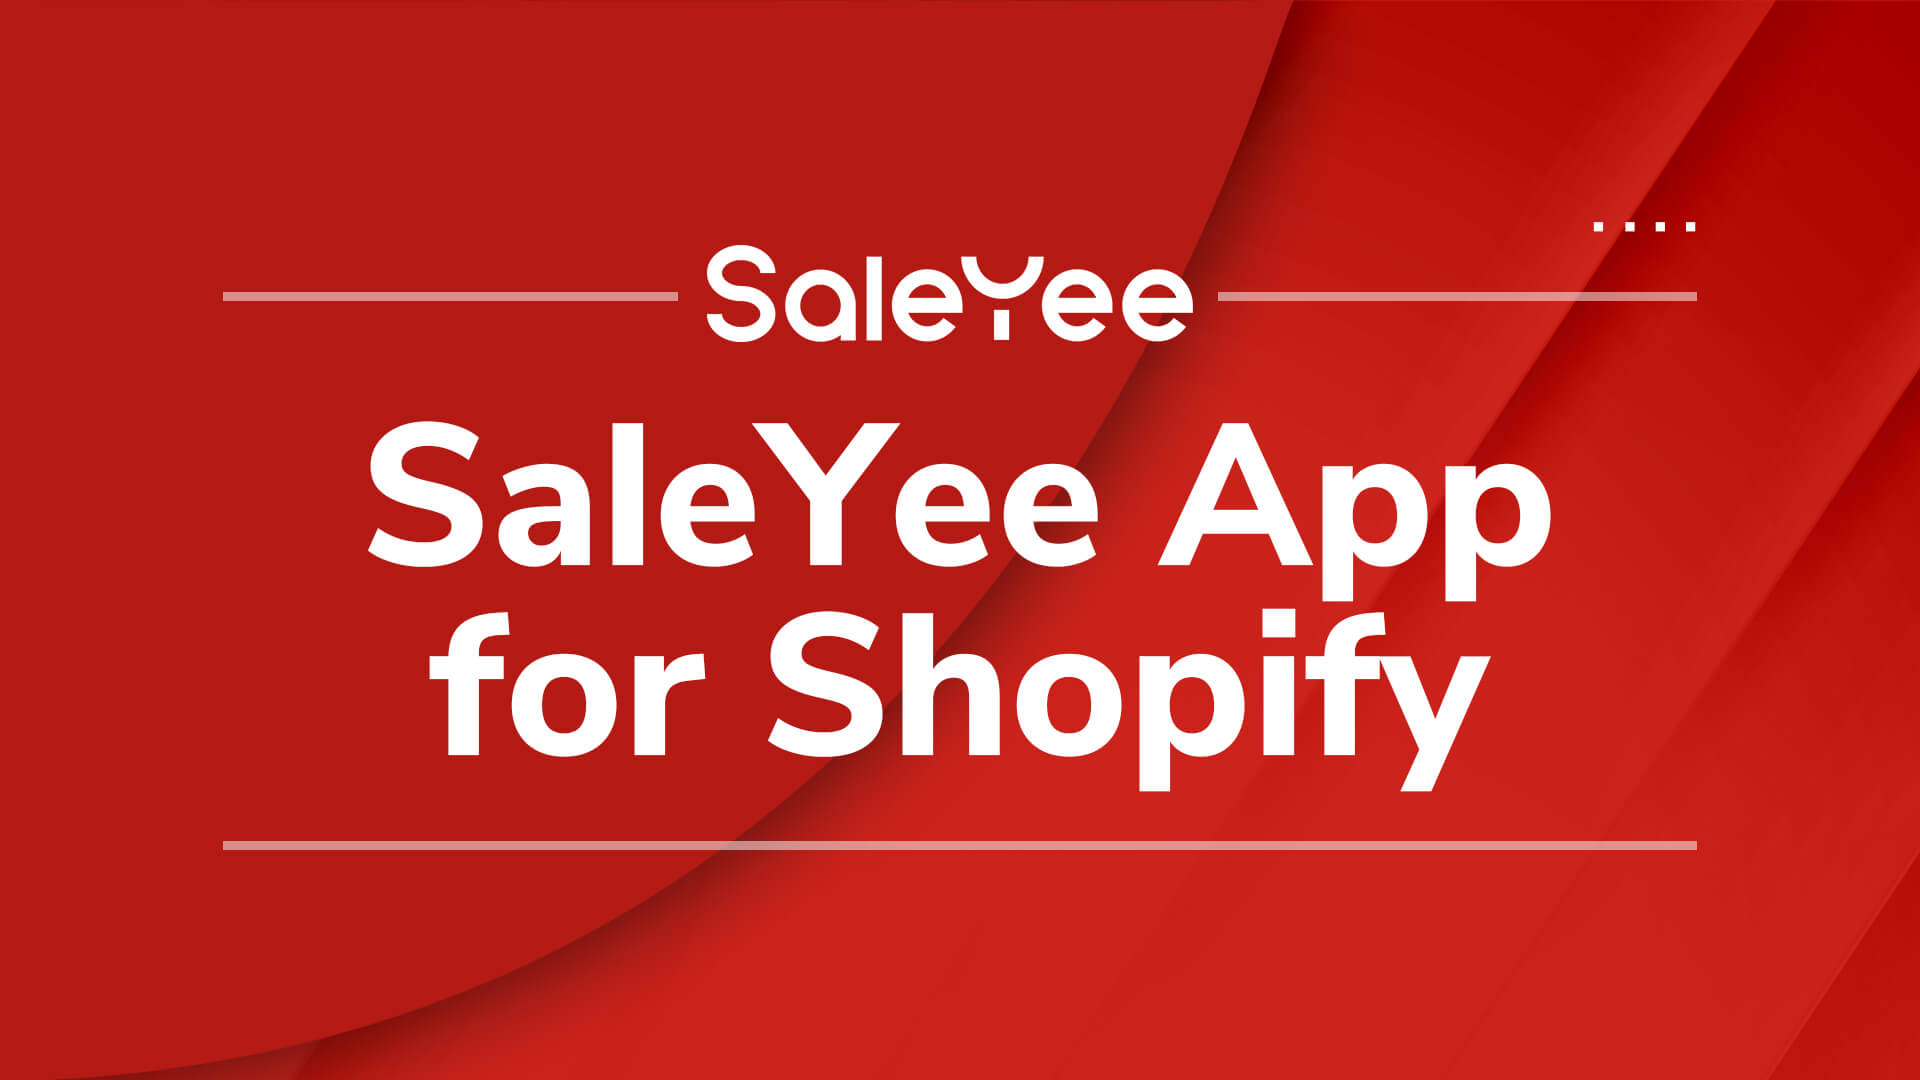 8. How to Use SaleYee App for Shopify Dropshipping